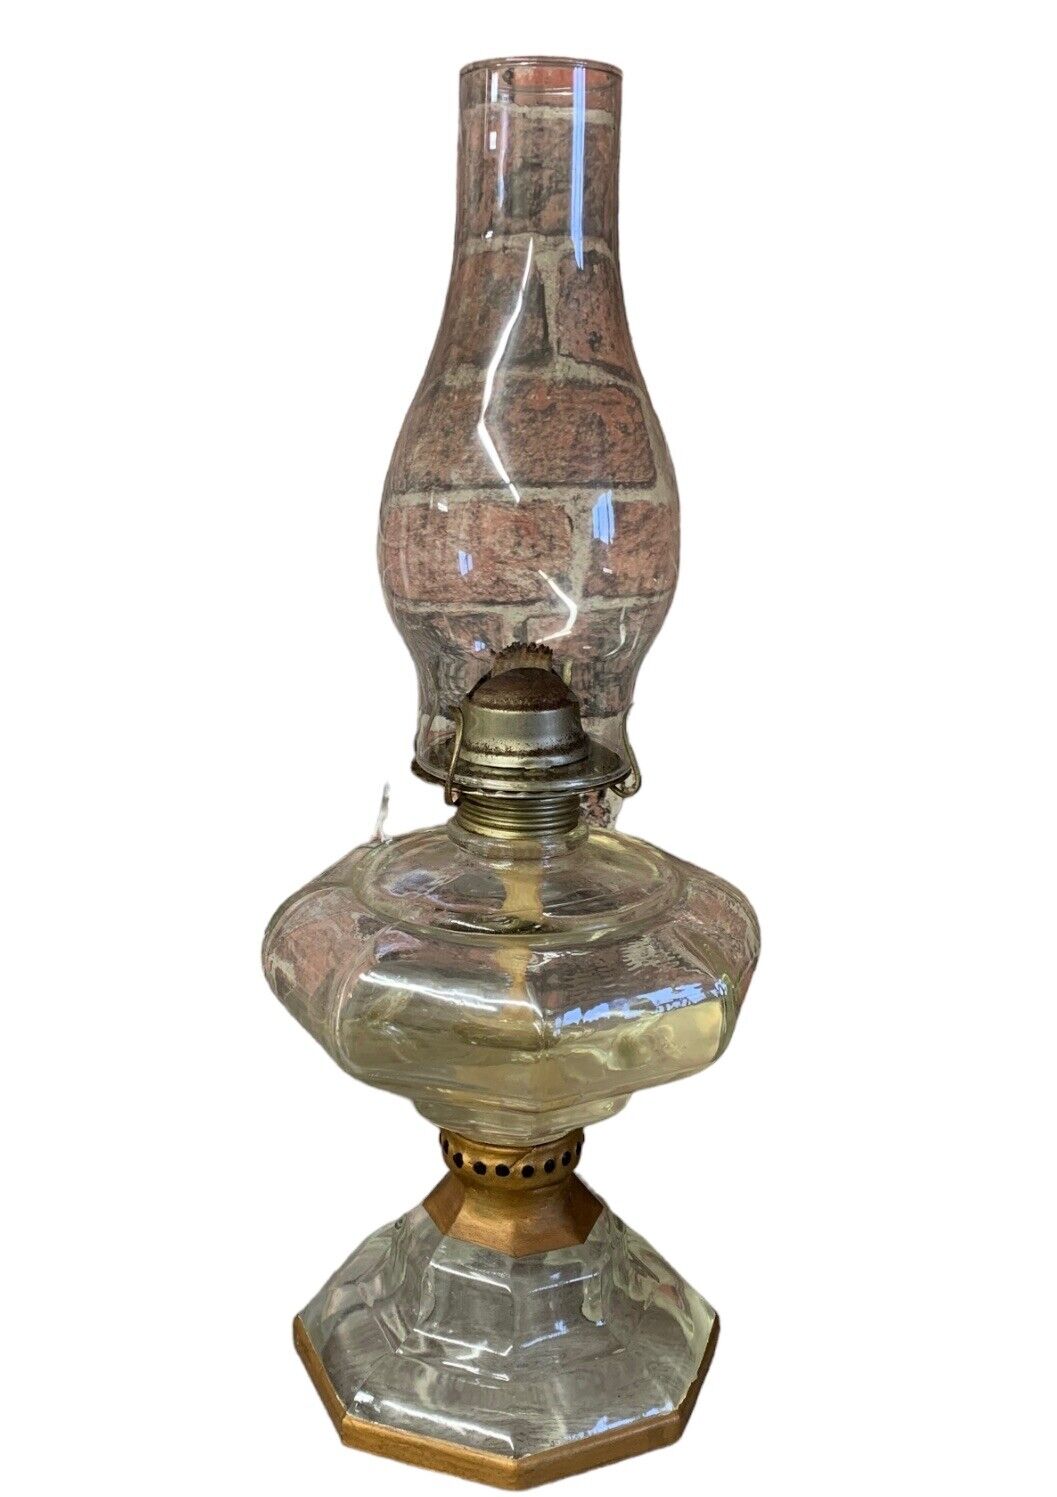 VINTAGE CLEAR GLASS HAND PAINTED OIL LAMP - 45cm High